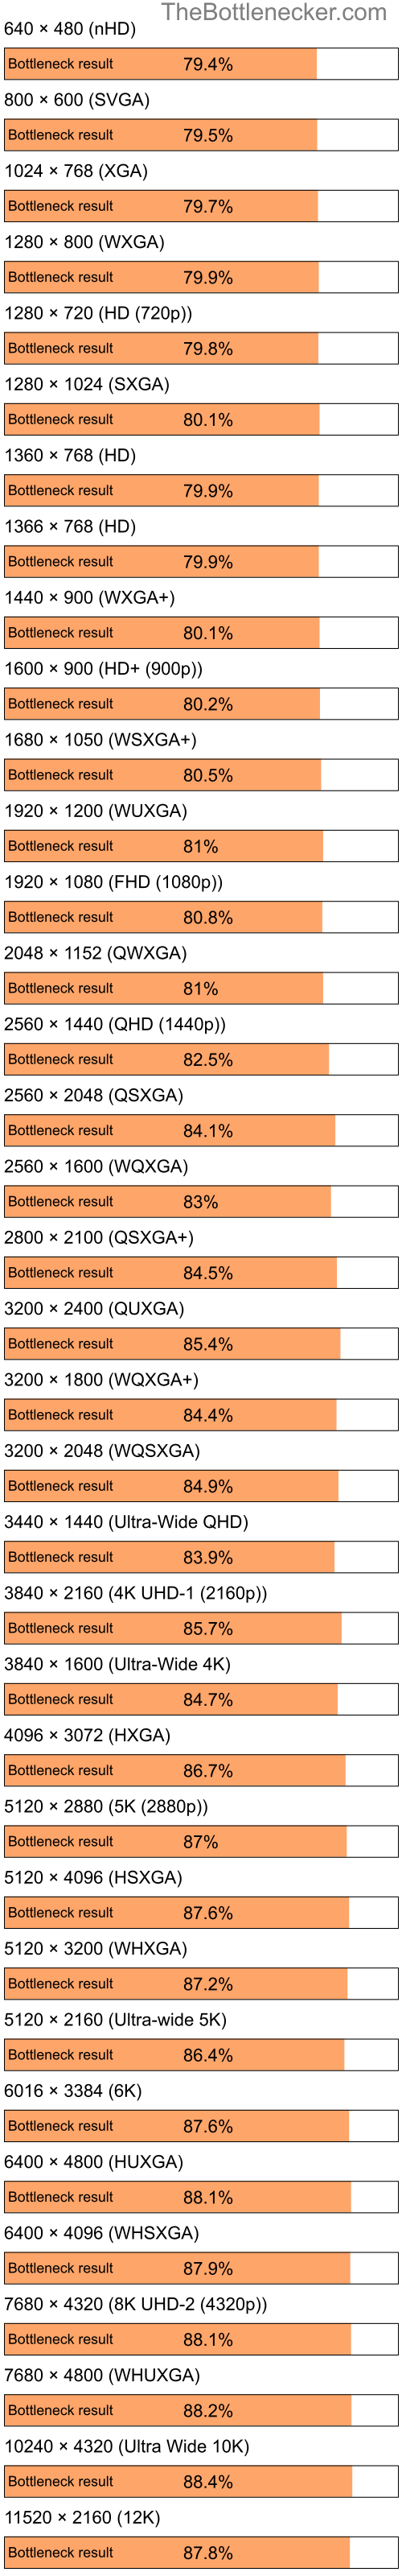 Bottleneck results by resolution for Intel Pentium 4 and NVIDIA GeForce 6150 LE in Graphic Card Intense Tasks